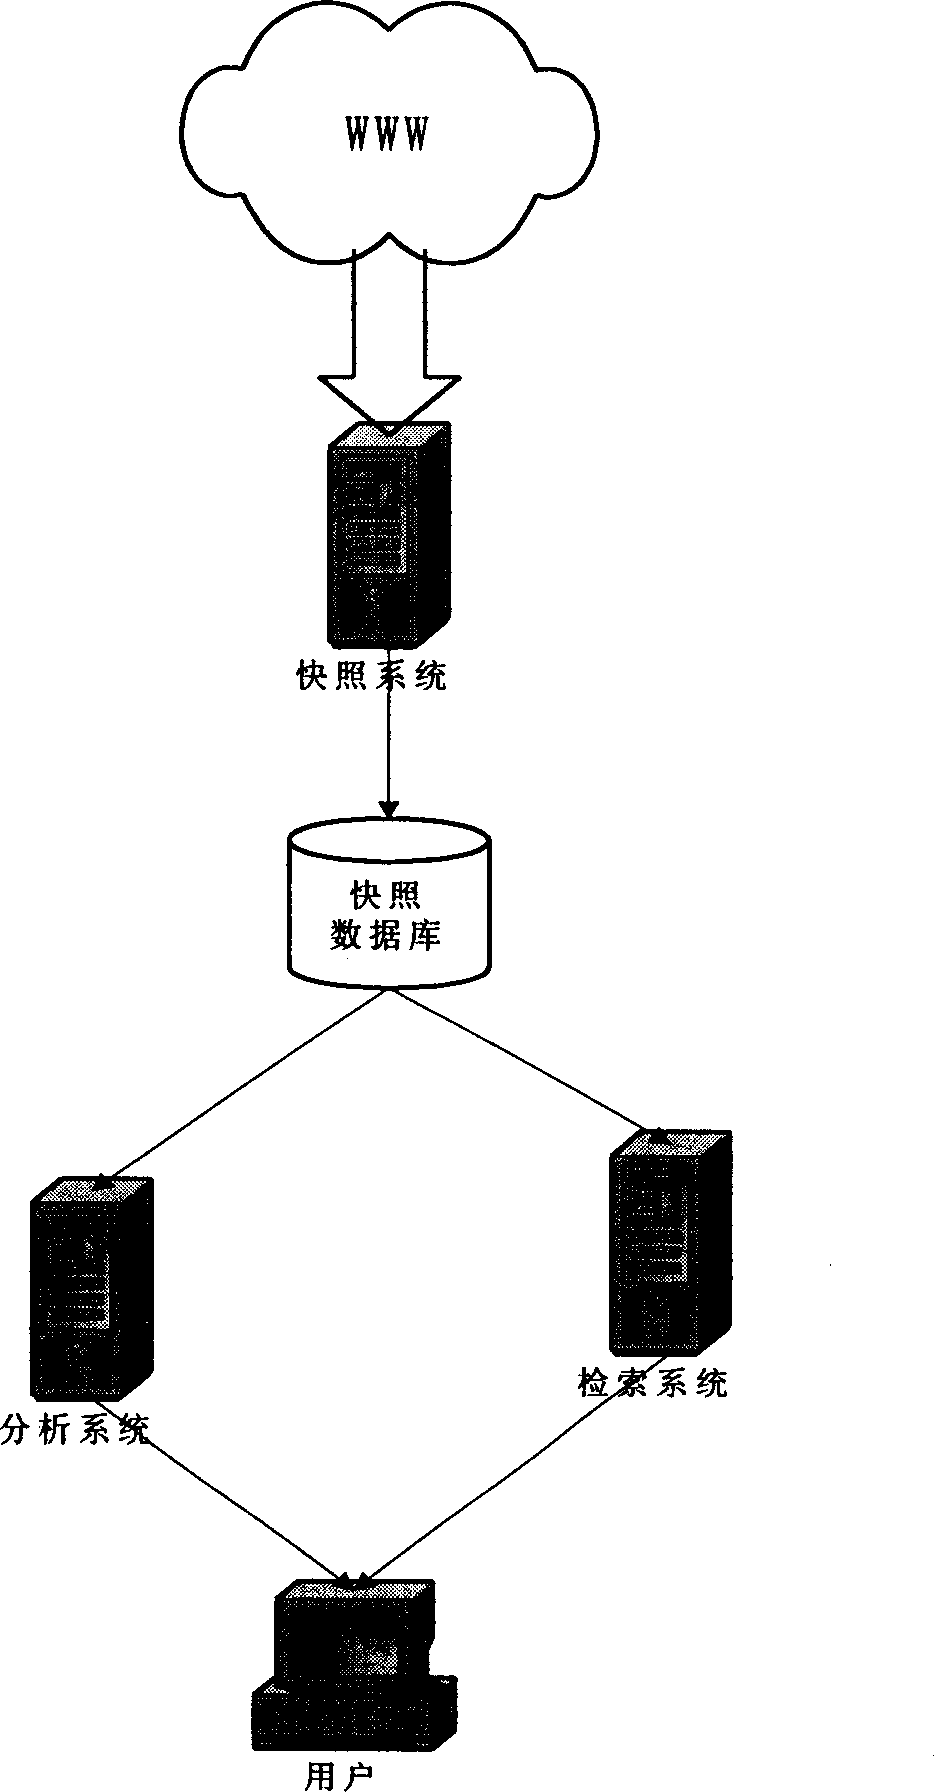 Method for recording and analysis of information over network by snap shot mode